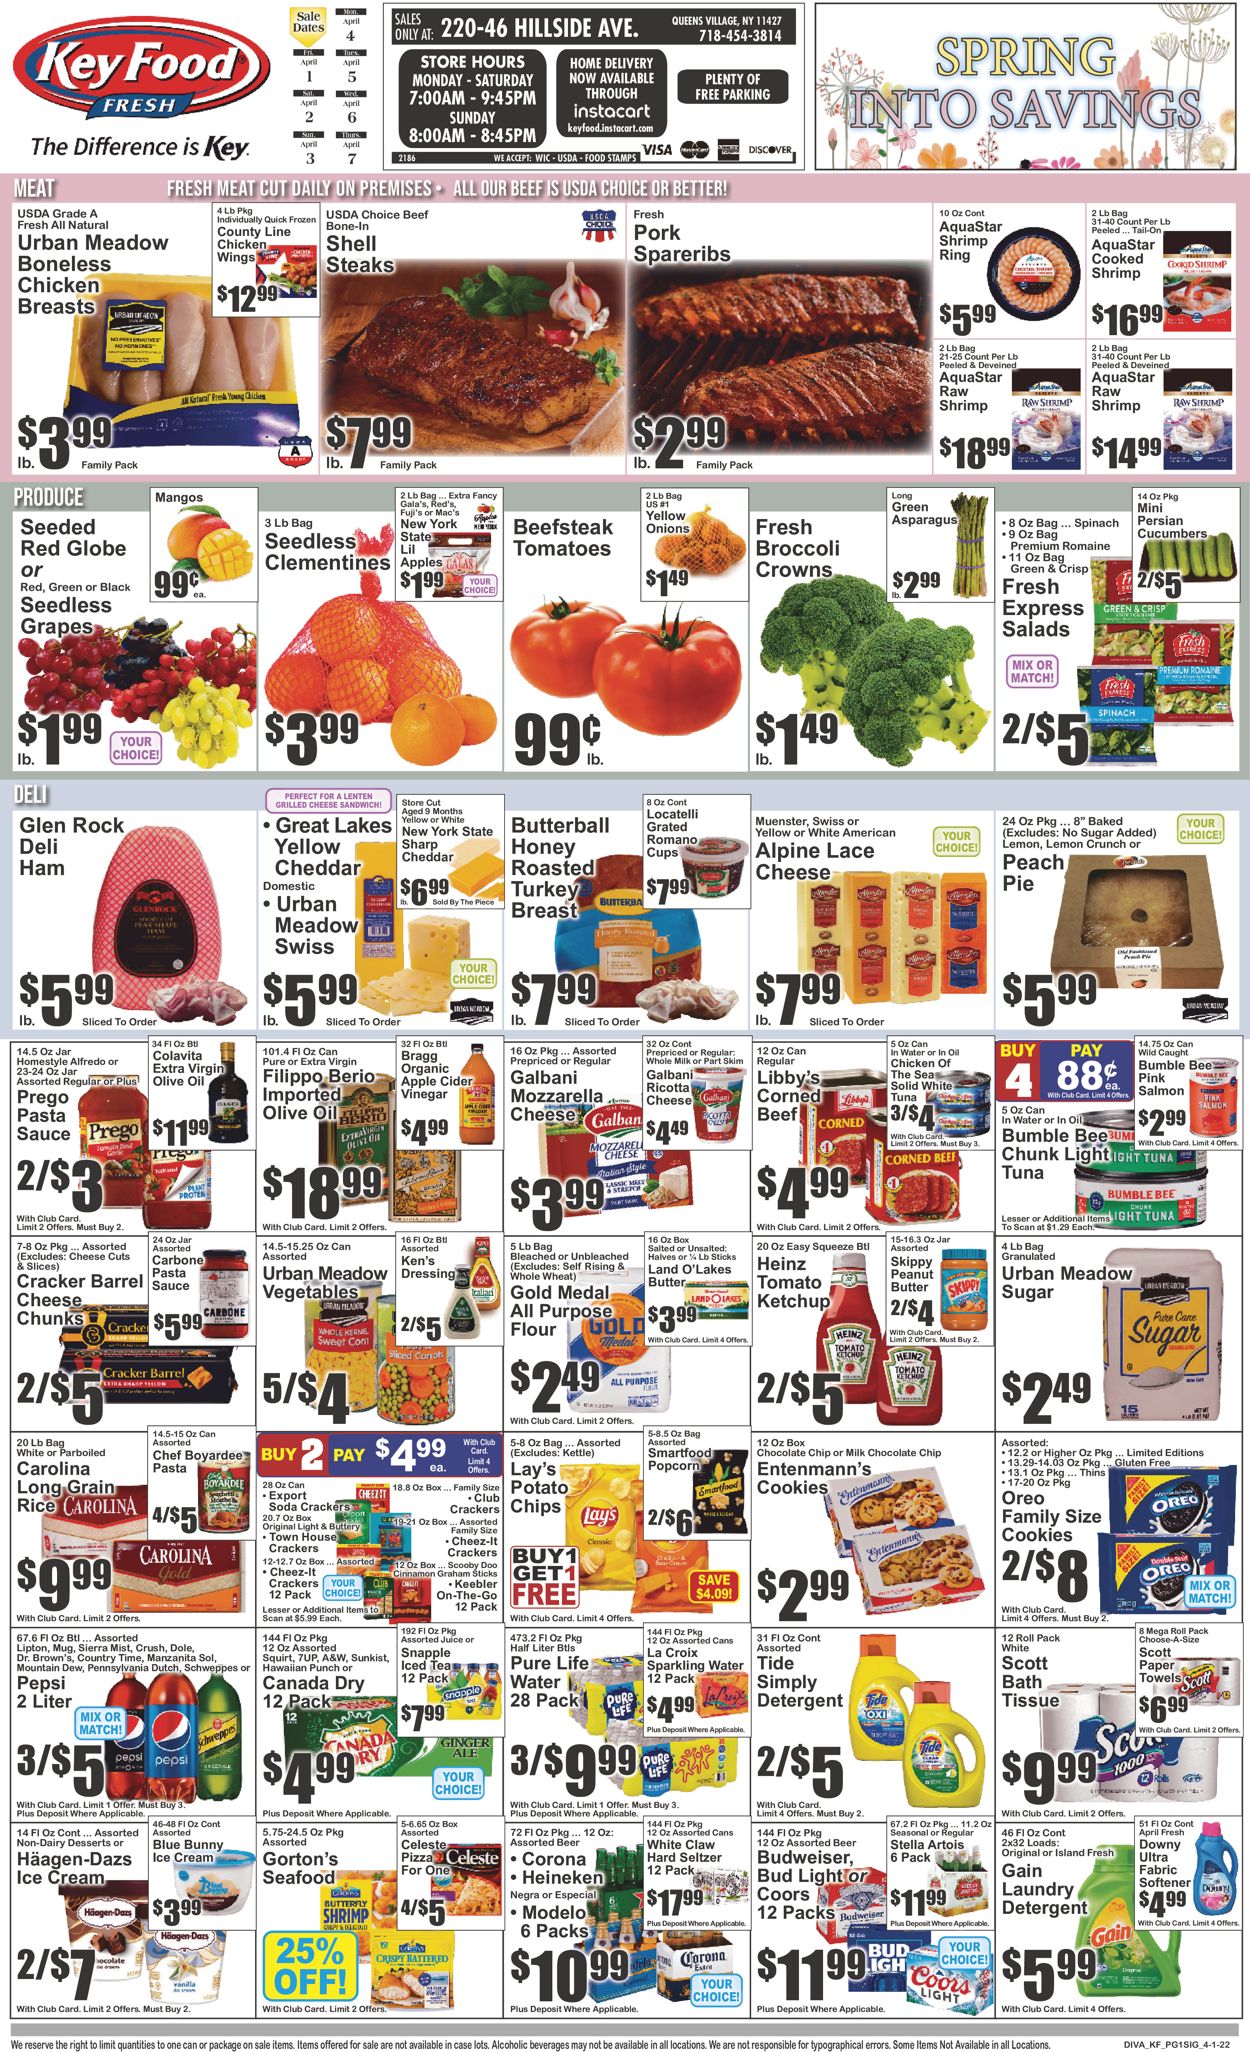 Key Food Current weekly ad 04/01 - 04/07/2022 - frequent-ads.com